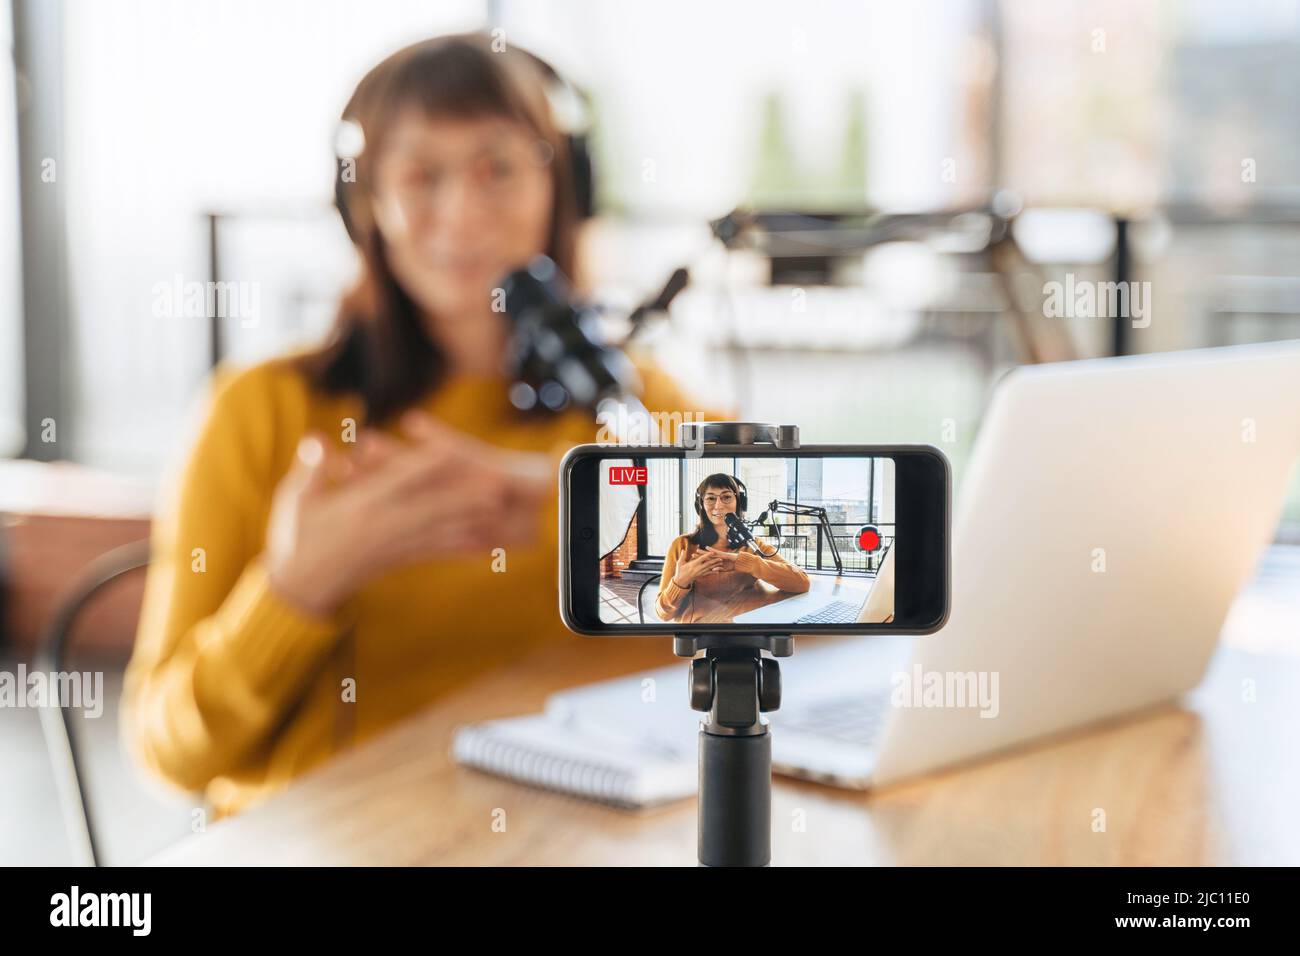 Female vlogger live streaming podcast using microphone, laptop and cellphone on tripod. Selective focus on smartphone camera screen with woman podcaster recording and broadcasting live video. Close-up Stock Photo